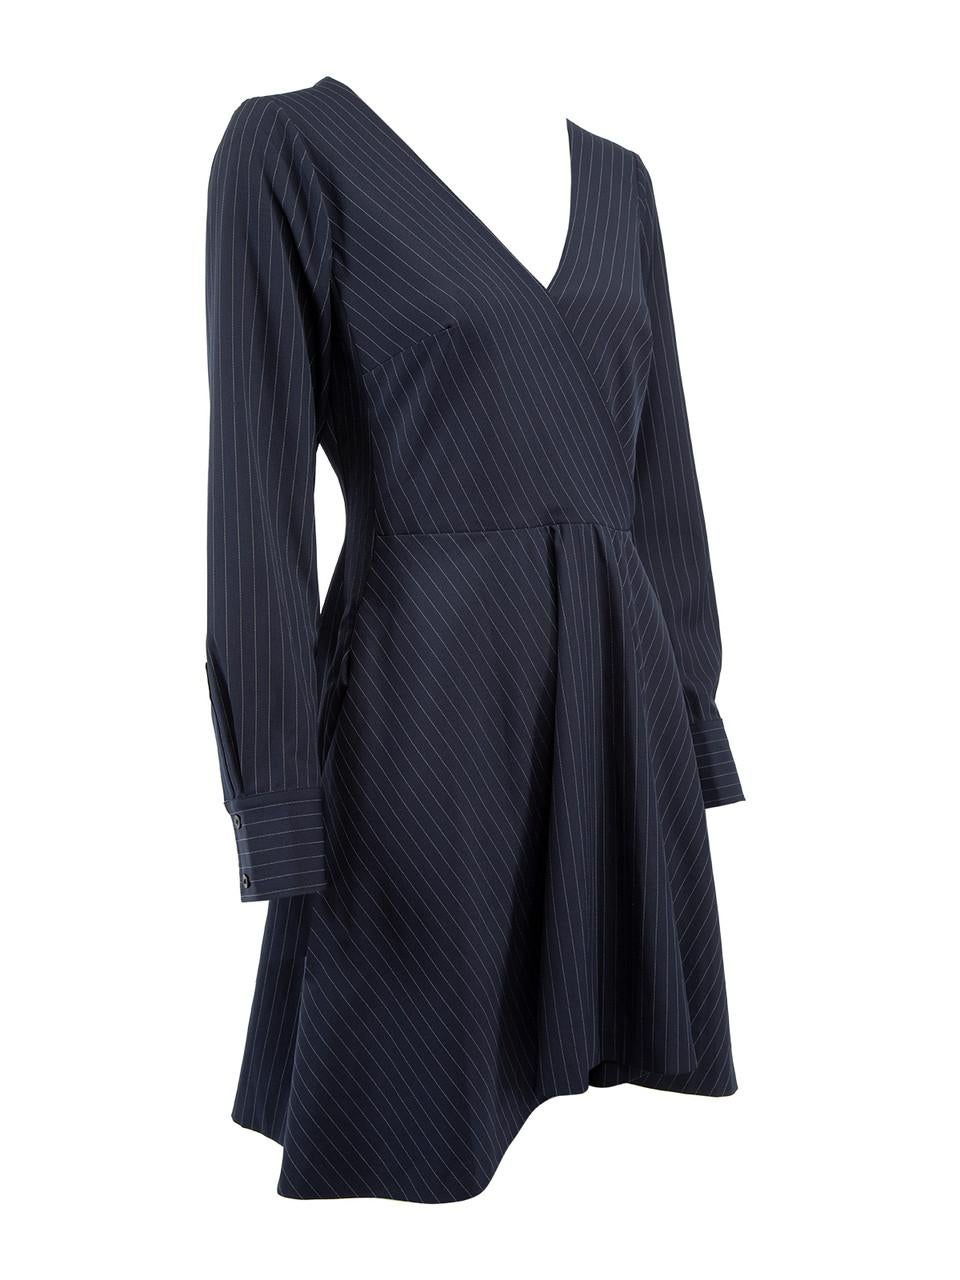 CONDITION is Never Worn. No visible wear to dress is evident on this used Club Monaco designer resale item. 
 
 Details
 Navy
 Polyester
 Skater style
 Long sleeves 
 V neckline
 Zip fastening 
 
 
 Made in CHINA
 
 Composition
 91% POLYESTER, 7%